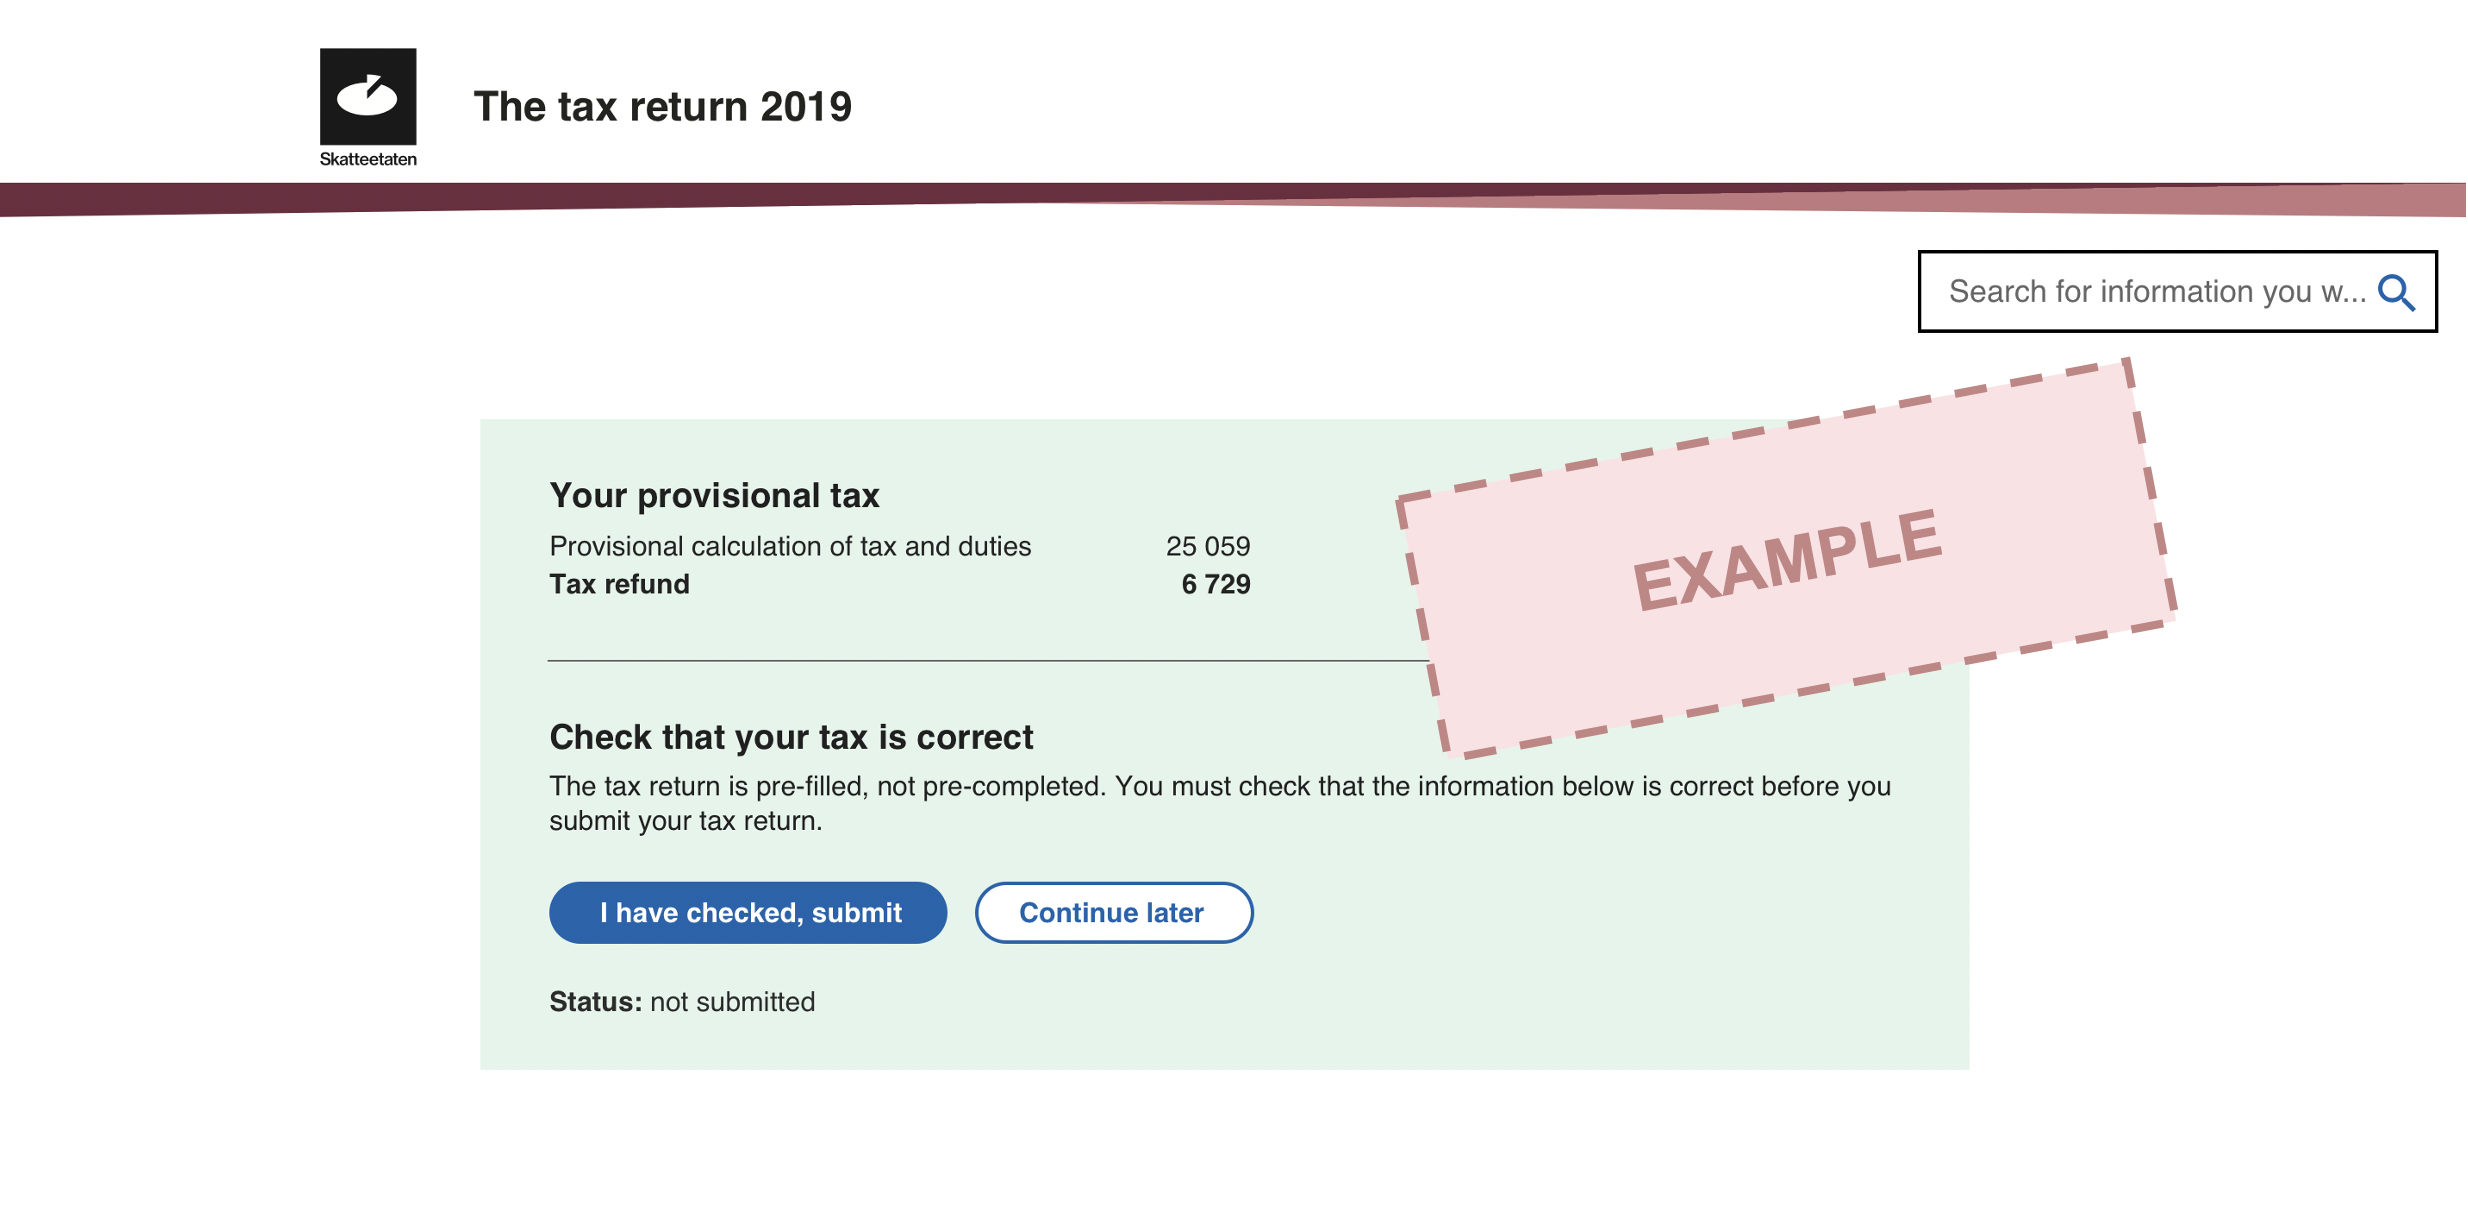 The tax calculation is at the top of the tax return